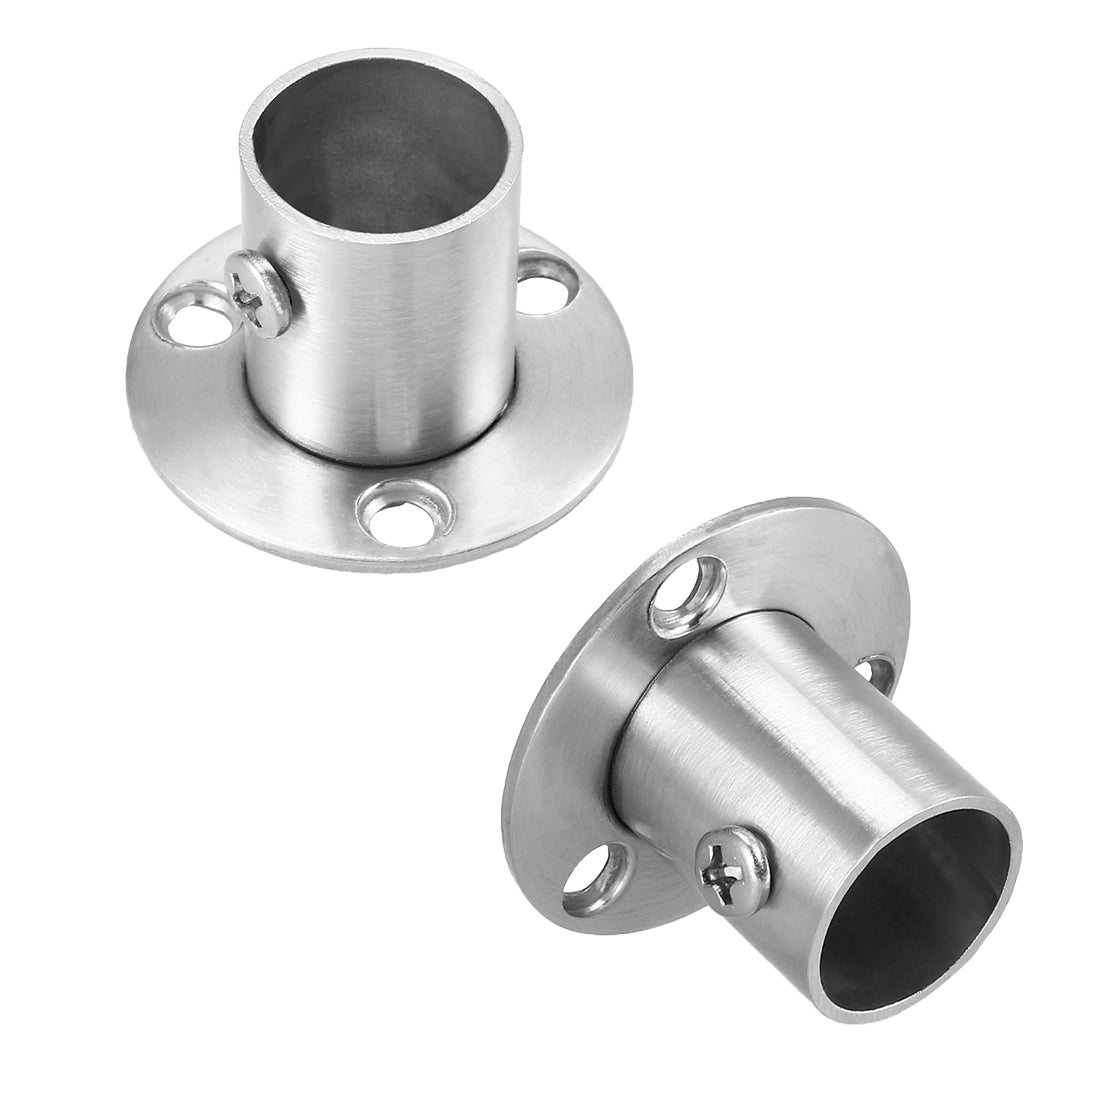 uxcell Uxcell Wardrobe Pipe Bracket, 19mm Dia, Wall Mount Hanging Rail Rod Support Socket 4pcs